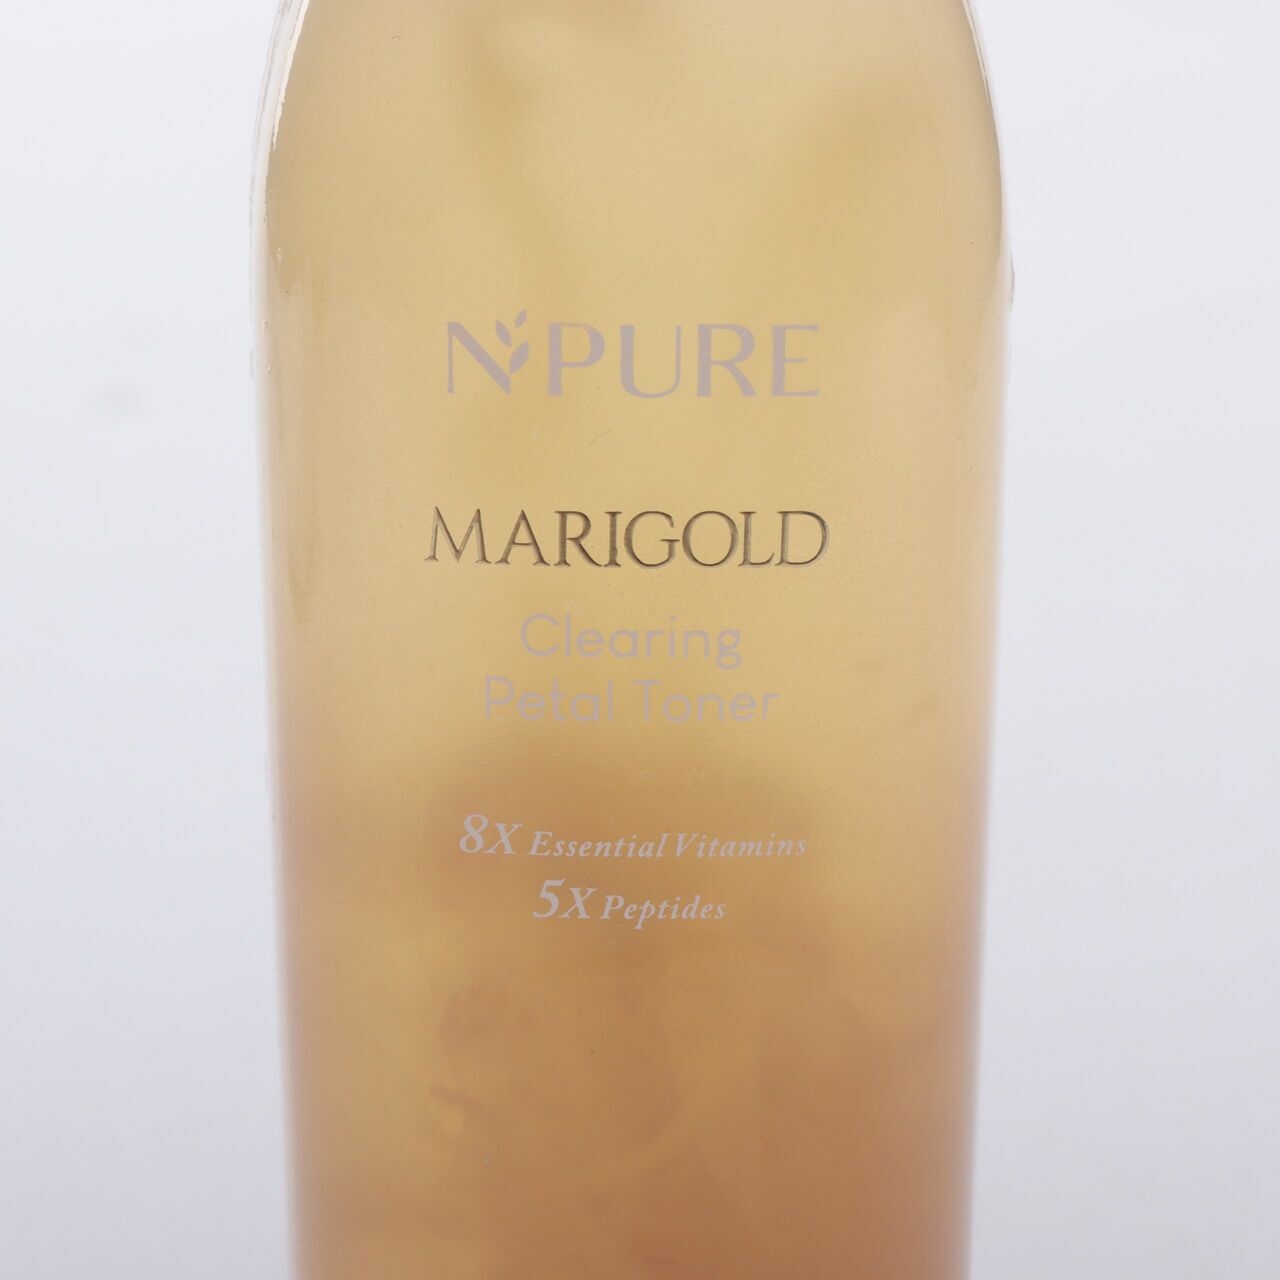 Private Collection Npure Marigold Clearing Petal Toner Skin Care